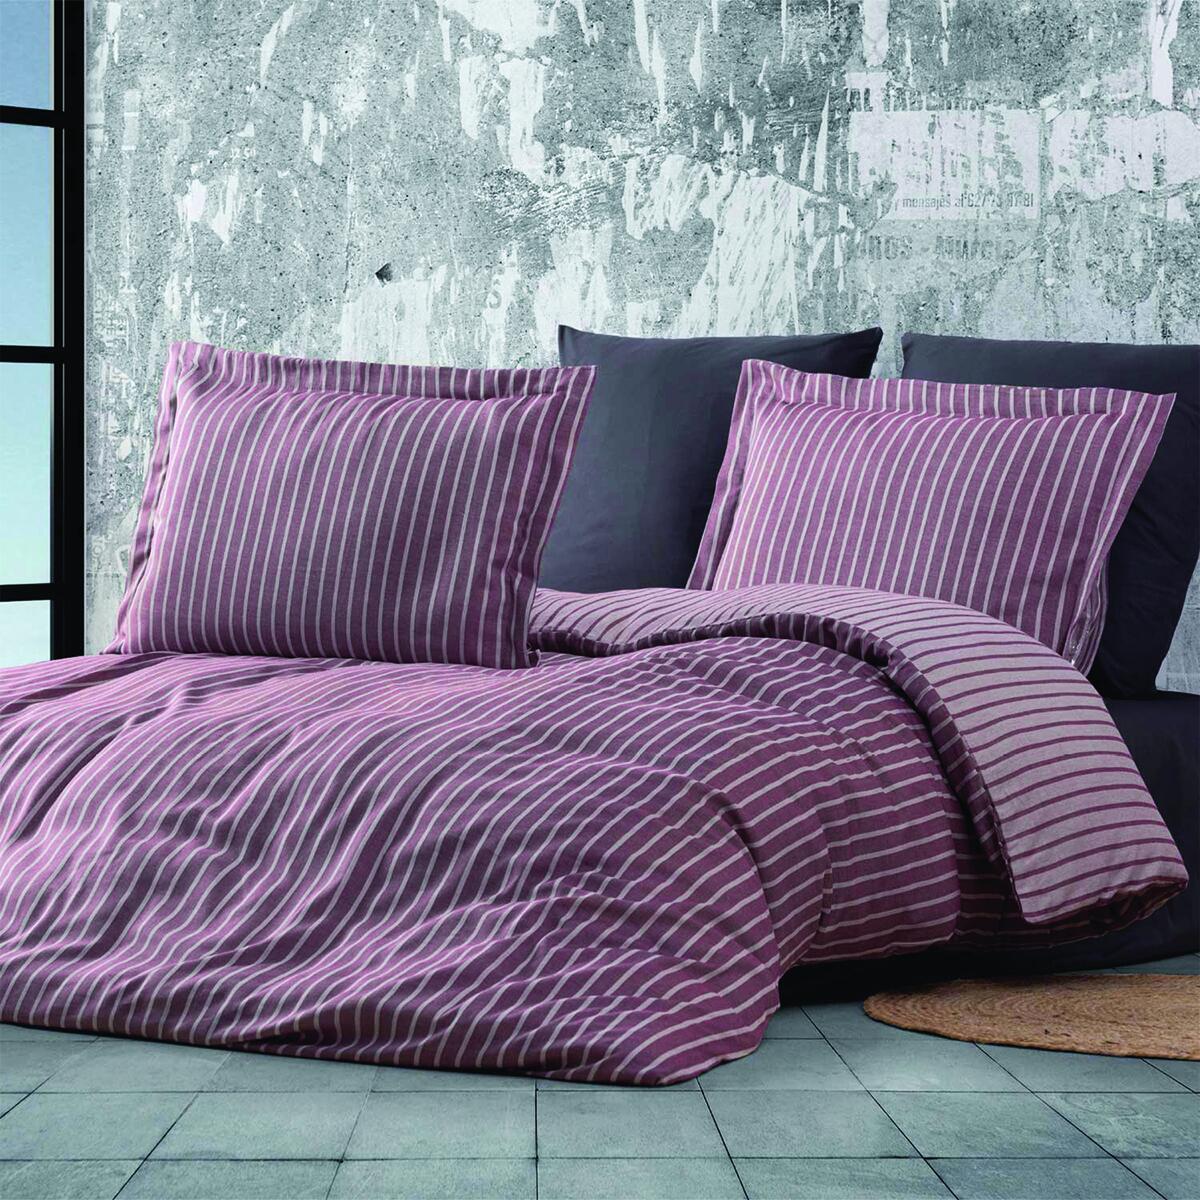 Bamboo Striped Claret Red Double Duvet Cover Set